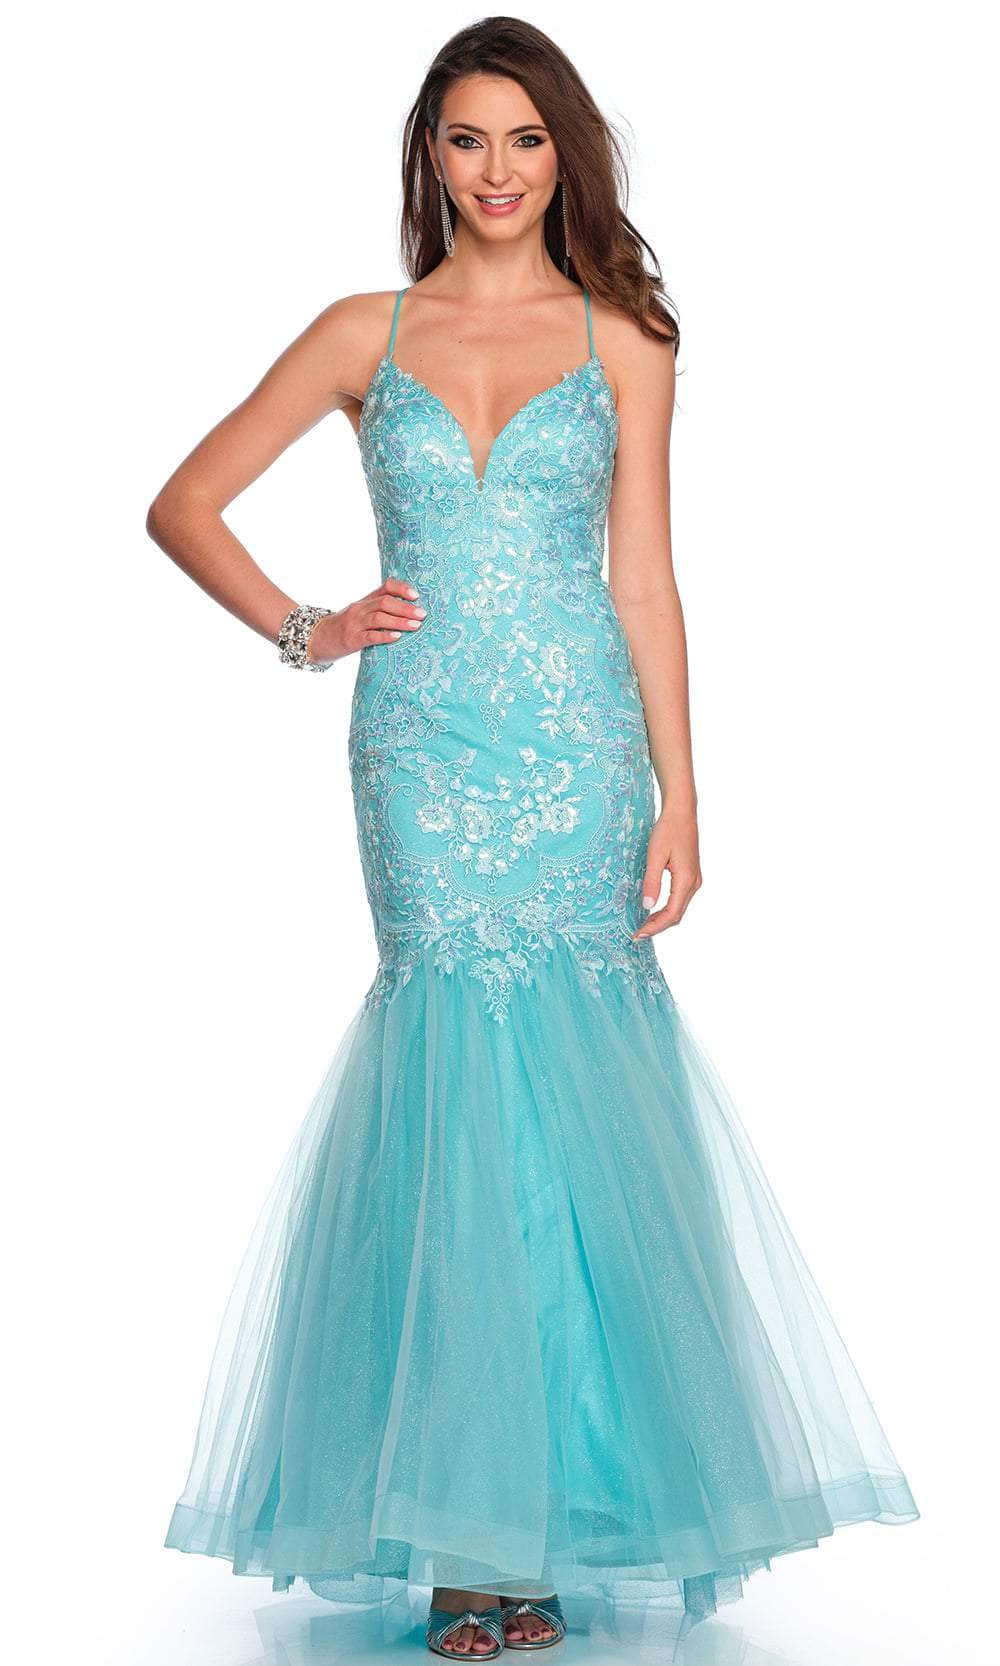 Dave & Johnny 11372 - Lace-Up Back Sleeveless Prom Gown
